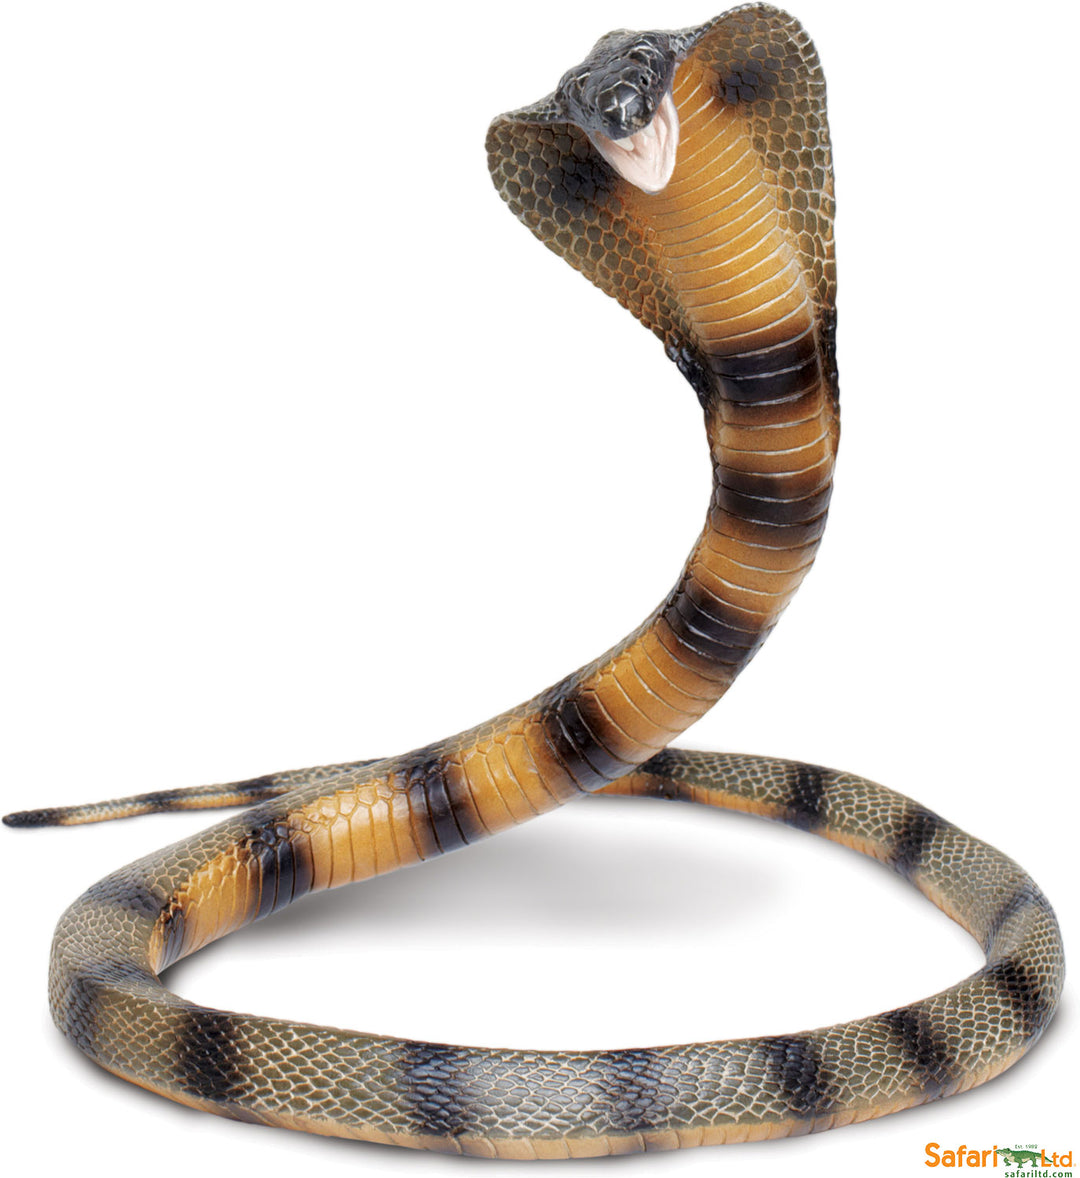 Incredible Creature Posable Coiling Cobra